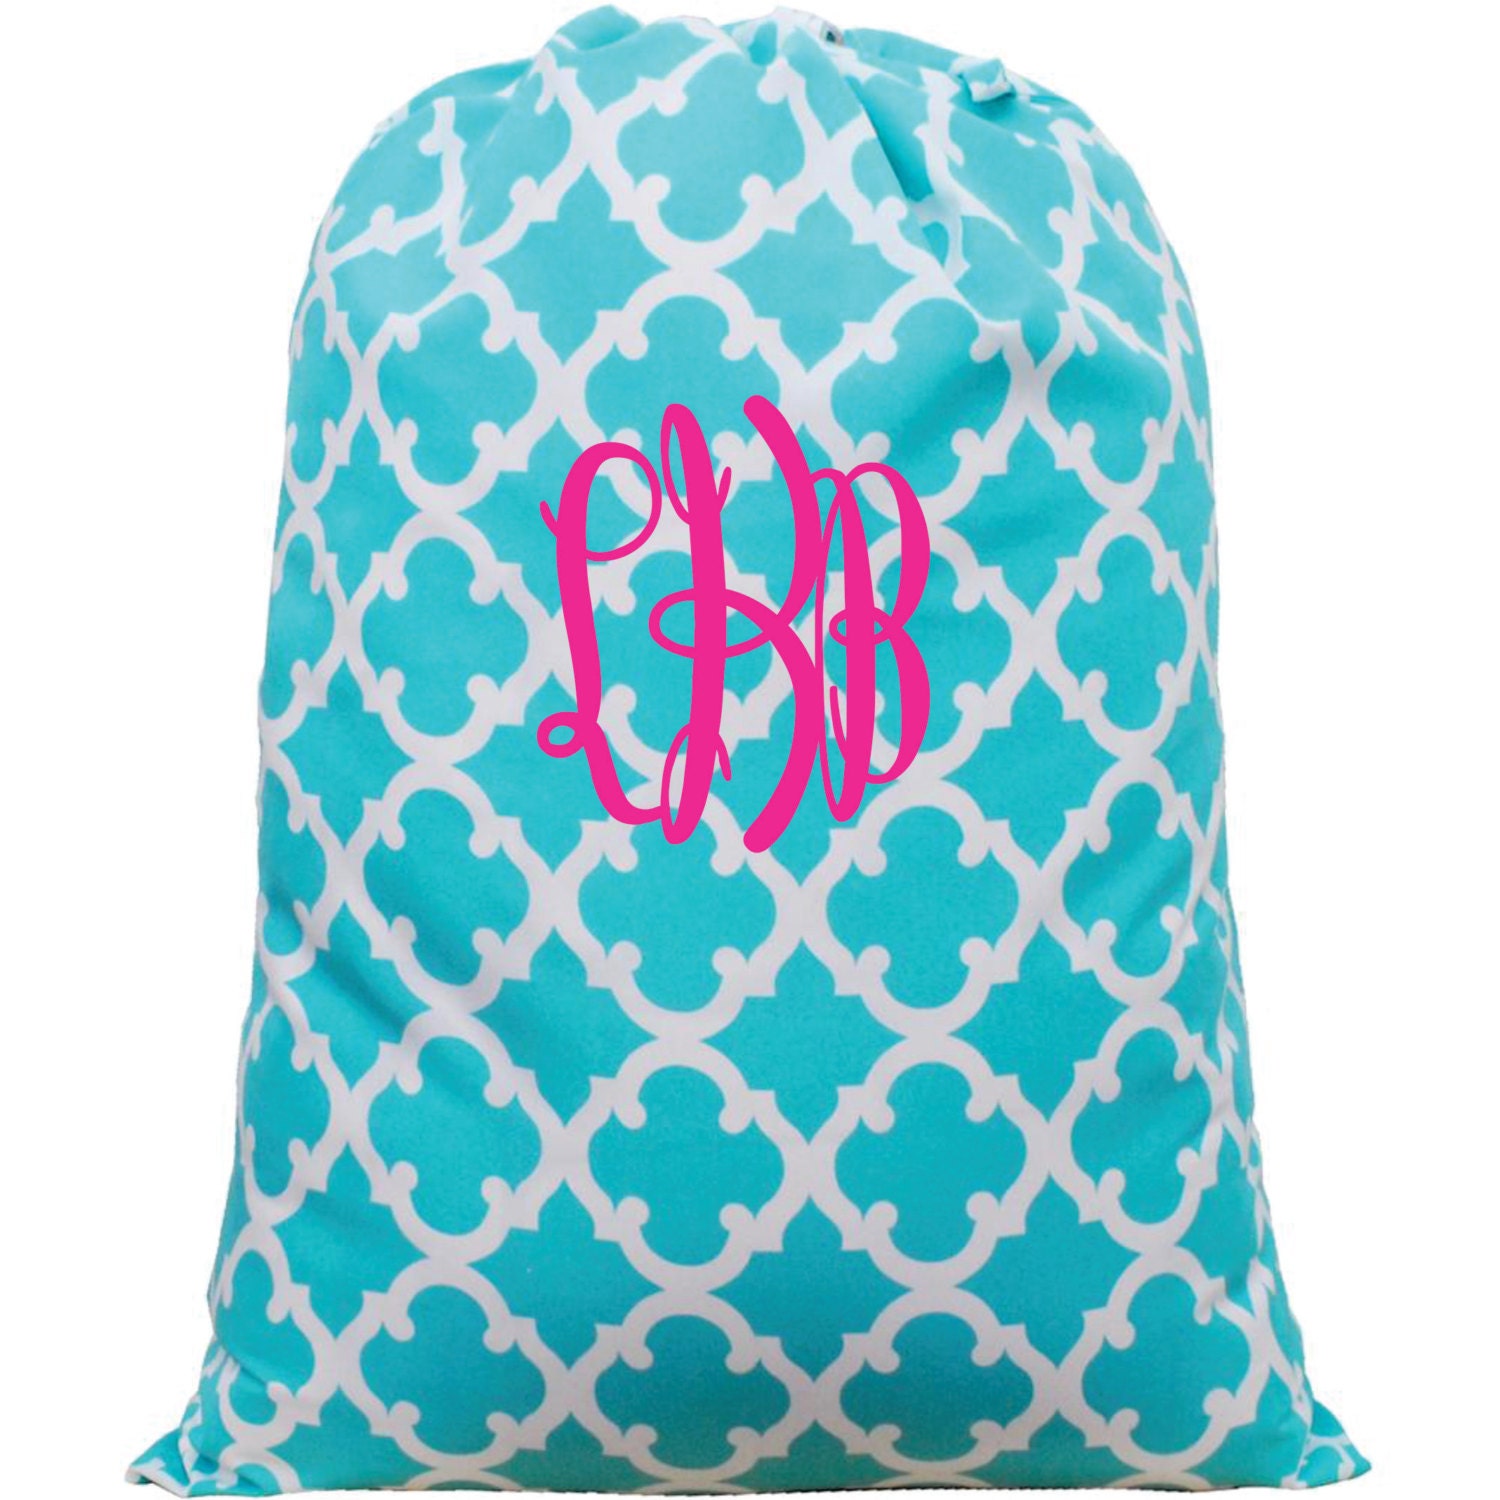 Personalized Monogrammed Laundry Bag by TheMonogramMaker on Etsy